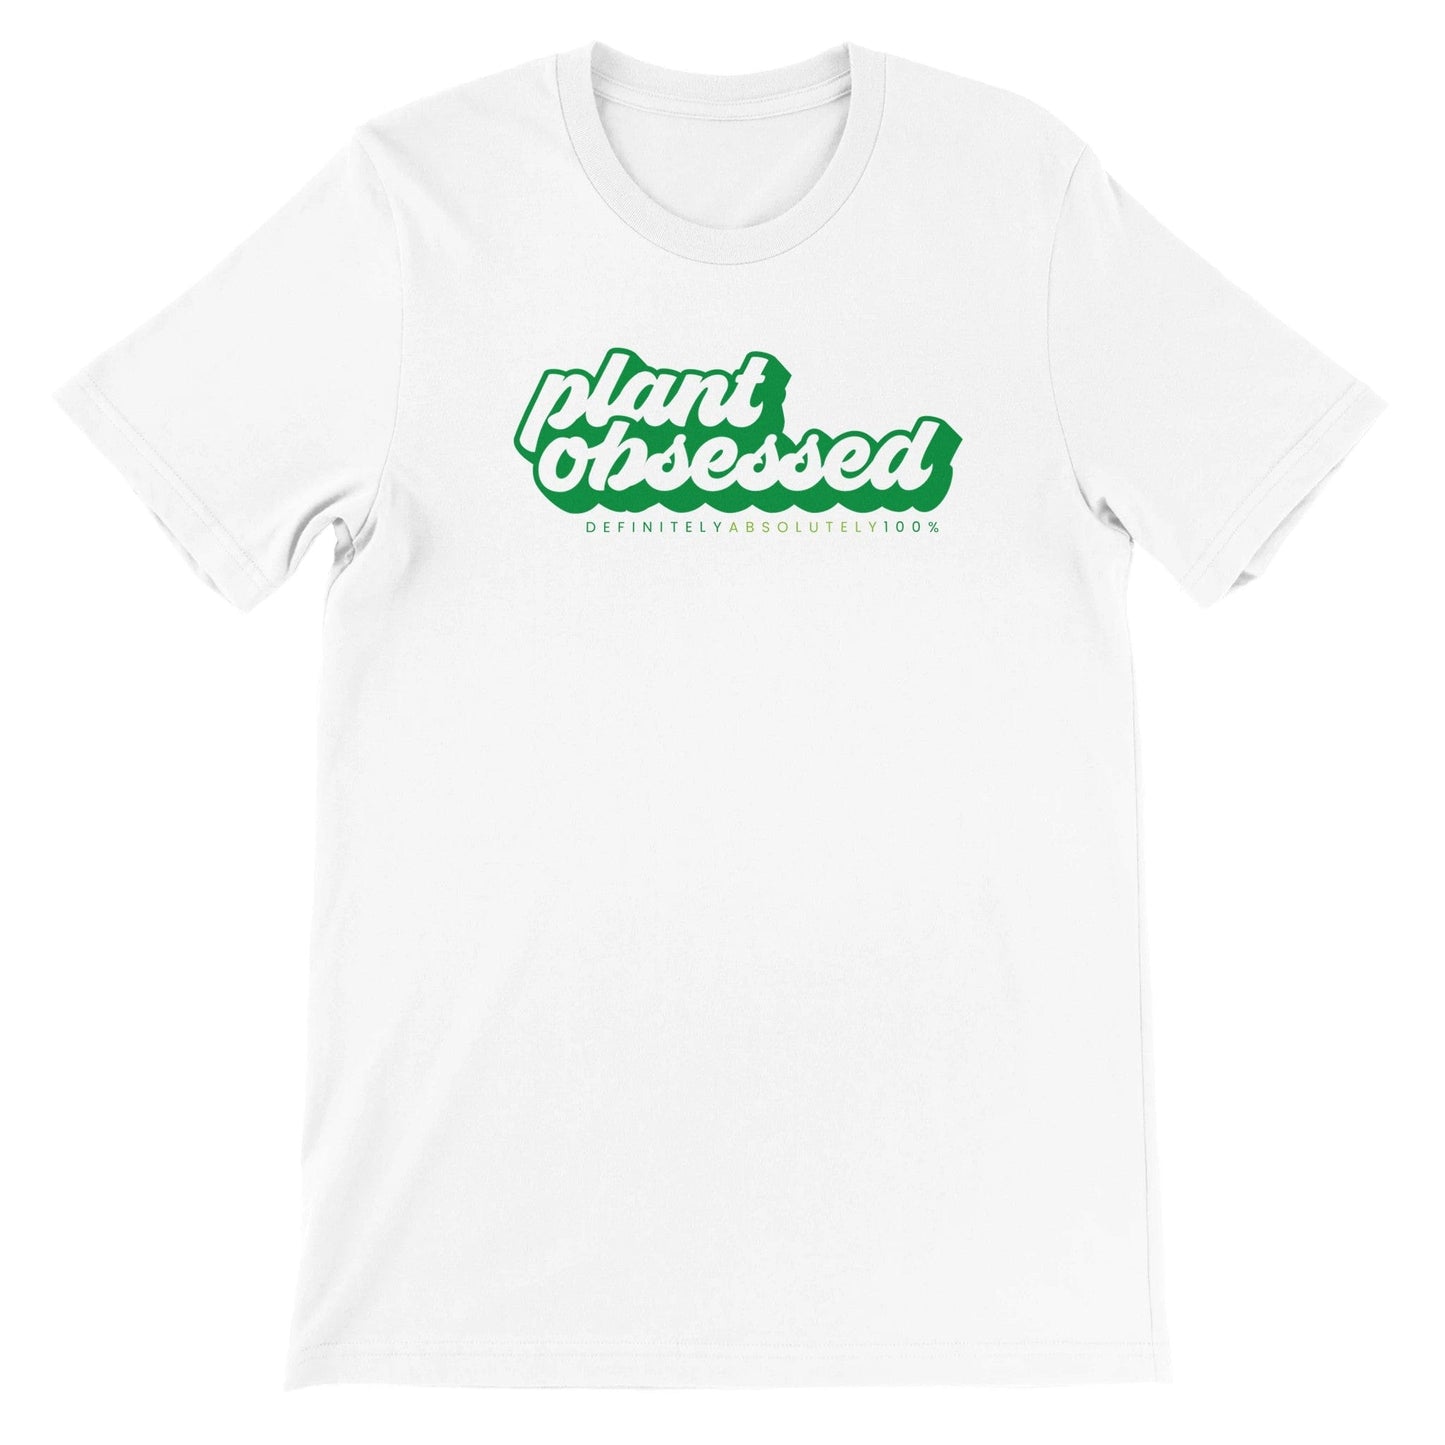 Grow Happy Gifts  Plant Obsessed T-shirt White / S